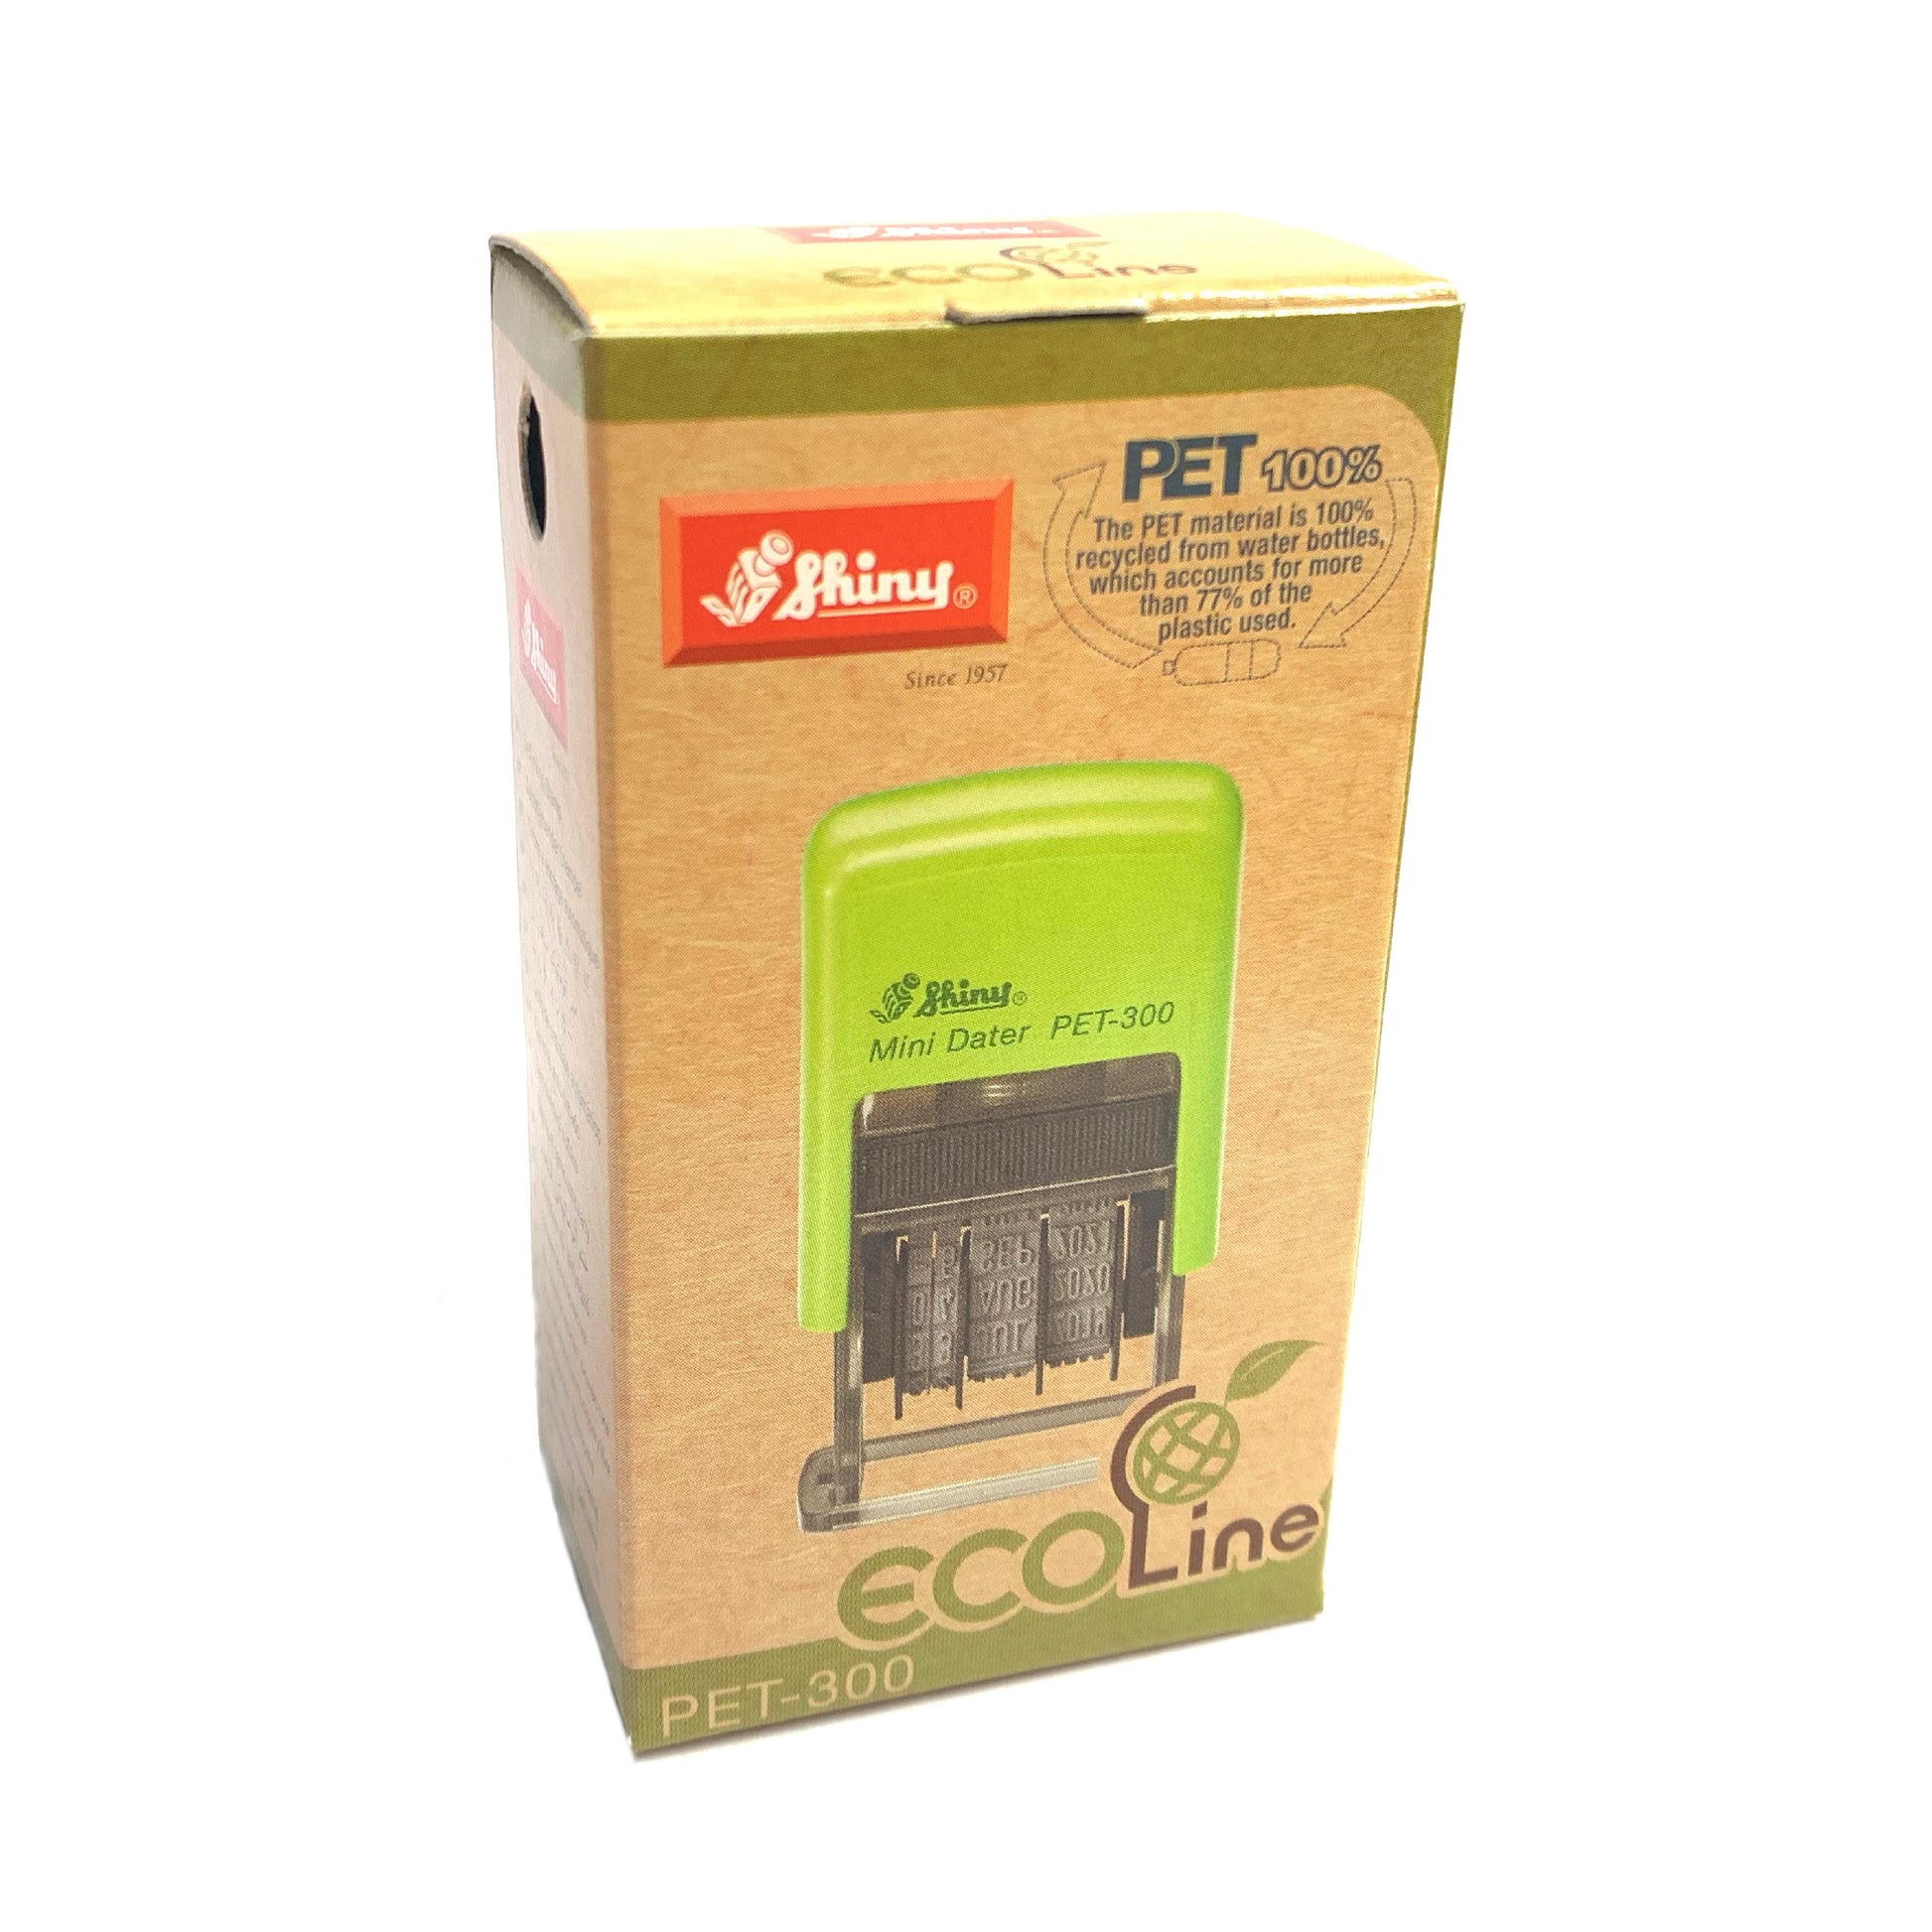 The box packaging for Shiny's Eco Line Mini Dater PET-300, made with 100% recycled PET material. The box has a natural cardboard background with a picture of the green self-inking date stamp and eco-friendly badges.